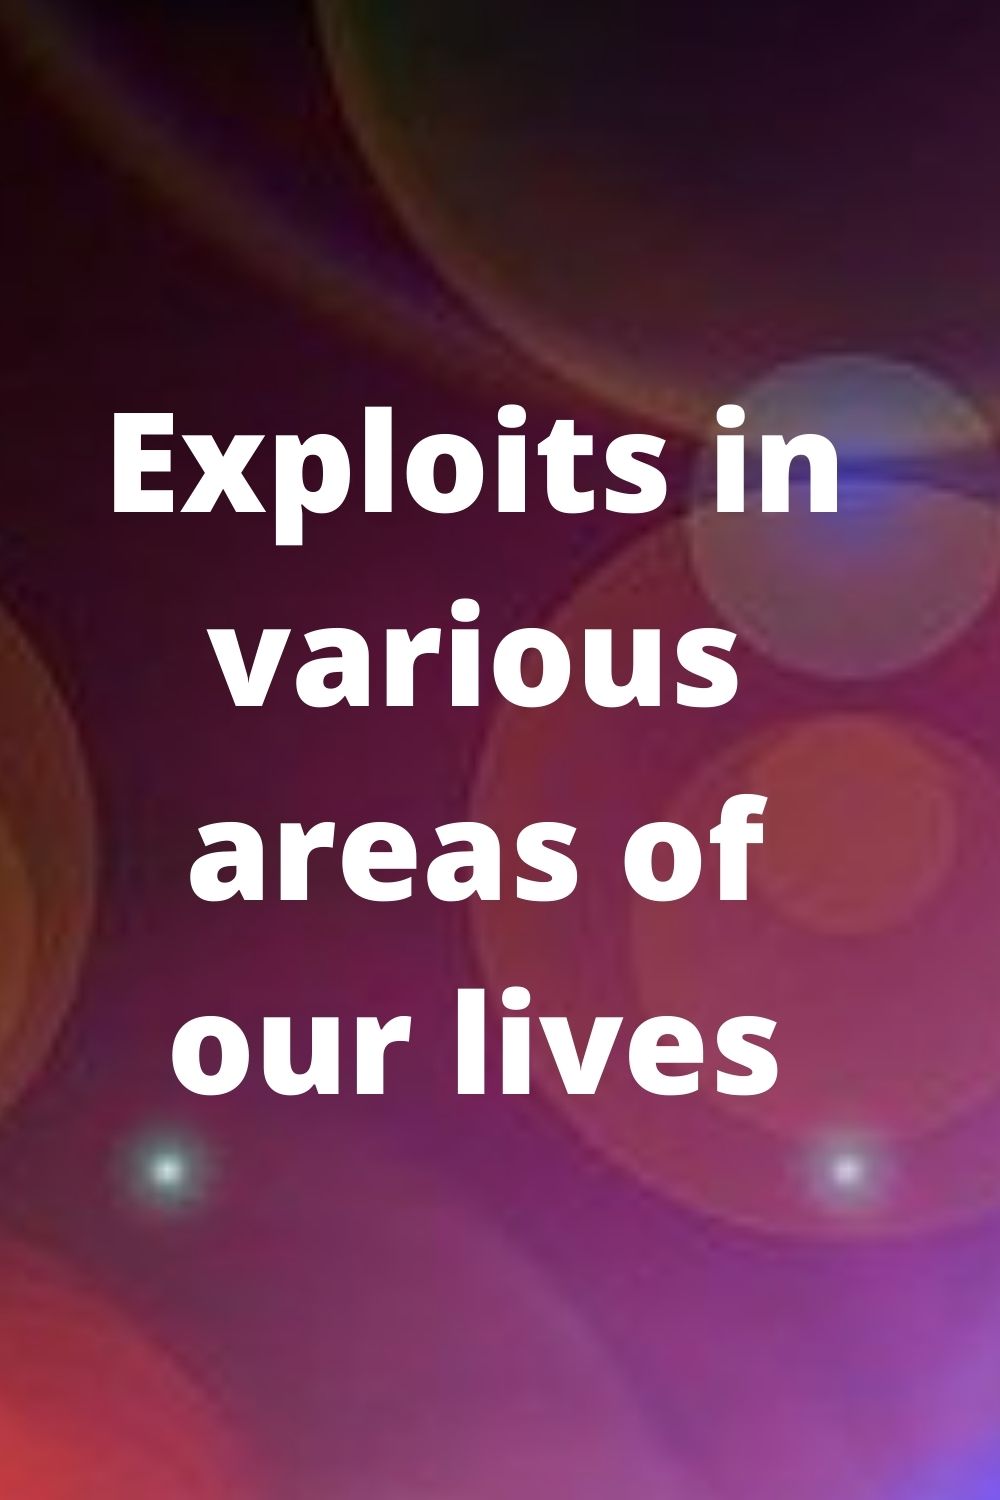 Introduction: Exploits in various areas of our lives